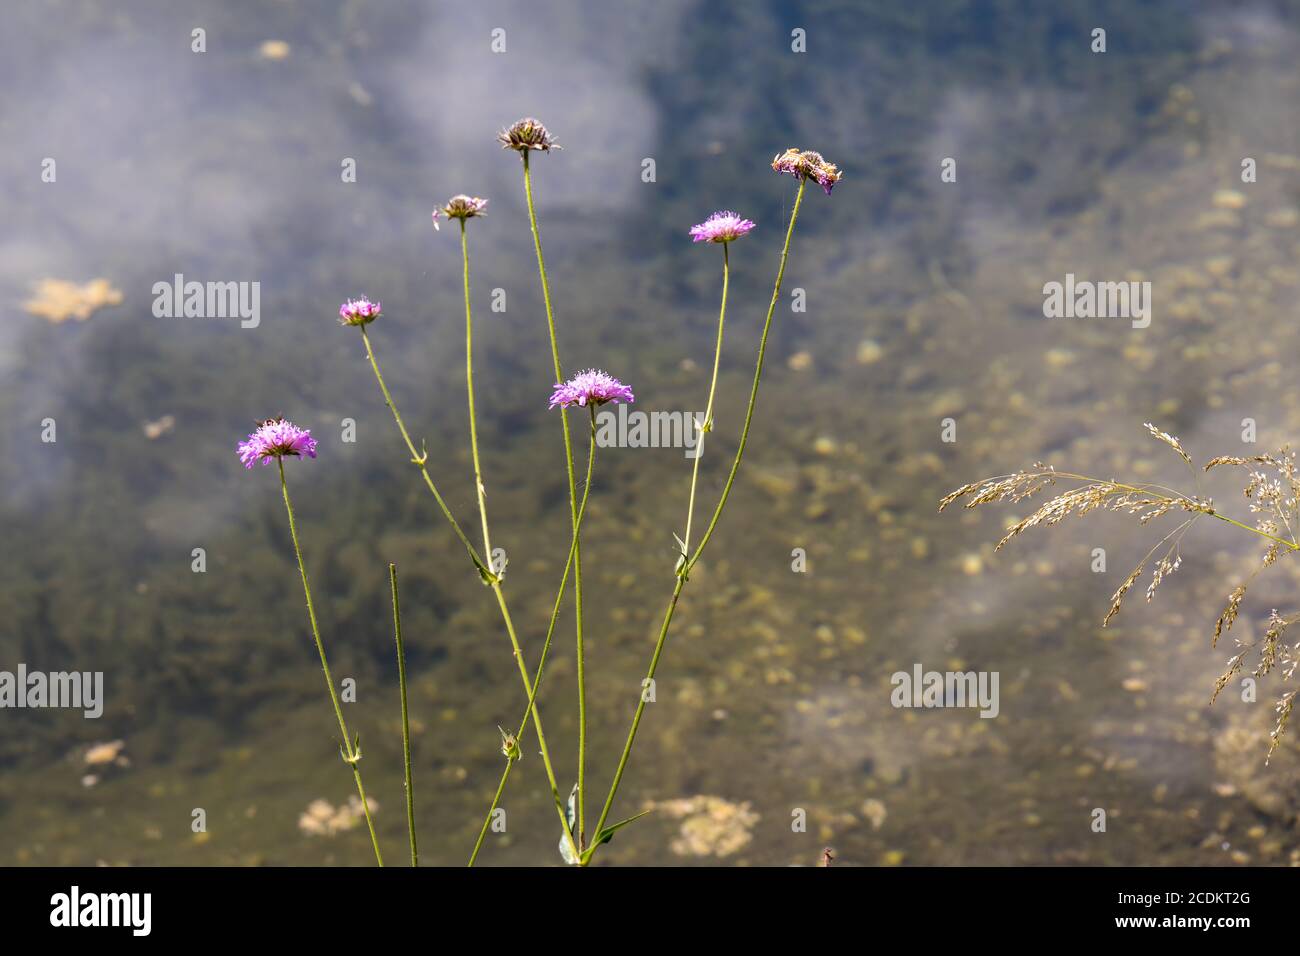 Aster Alpinus flowers growing wild in the Dolomites by Lake Misurina Stock Photo